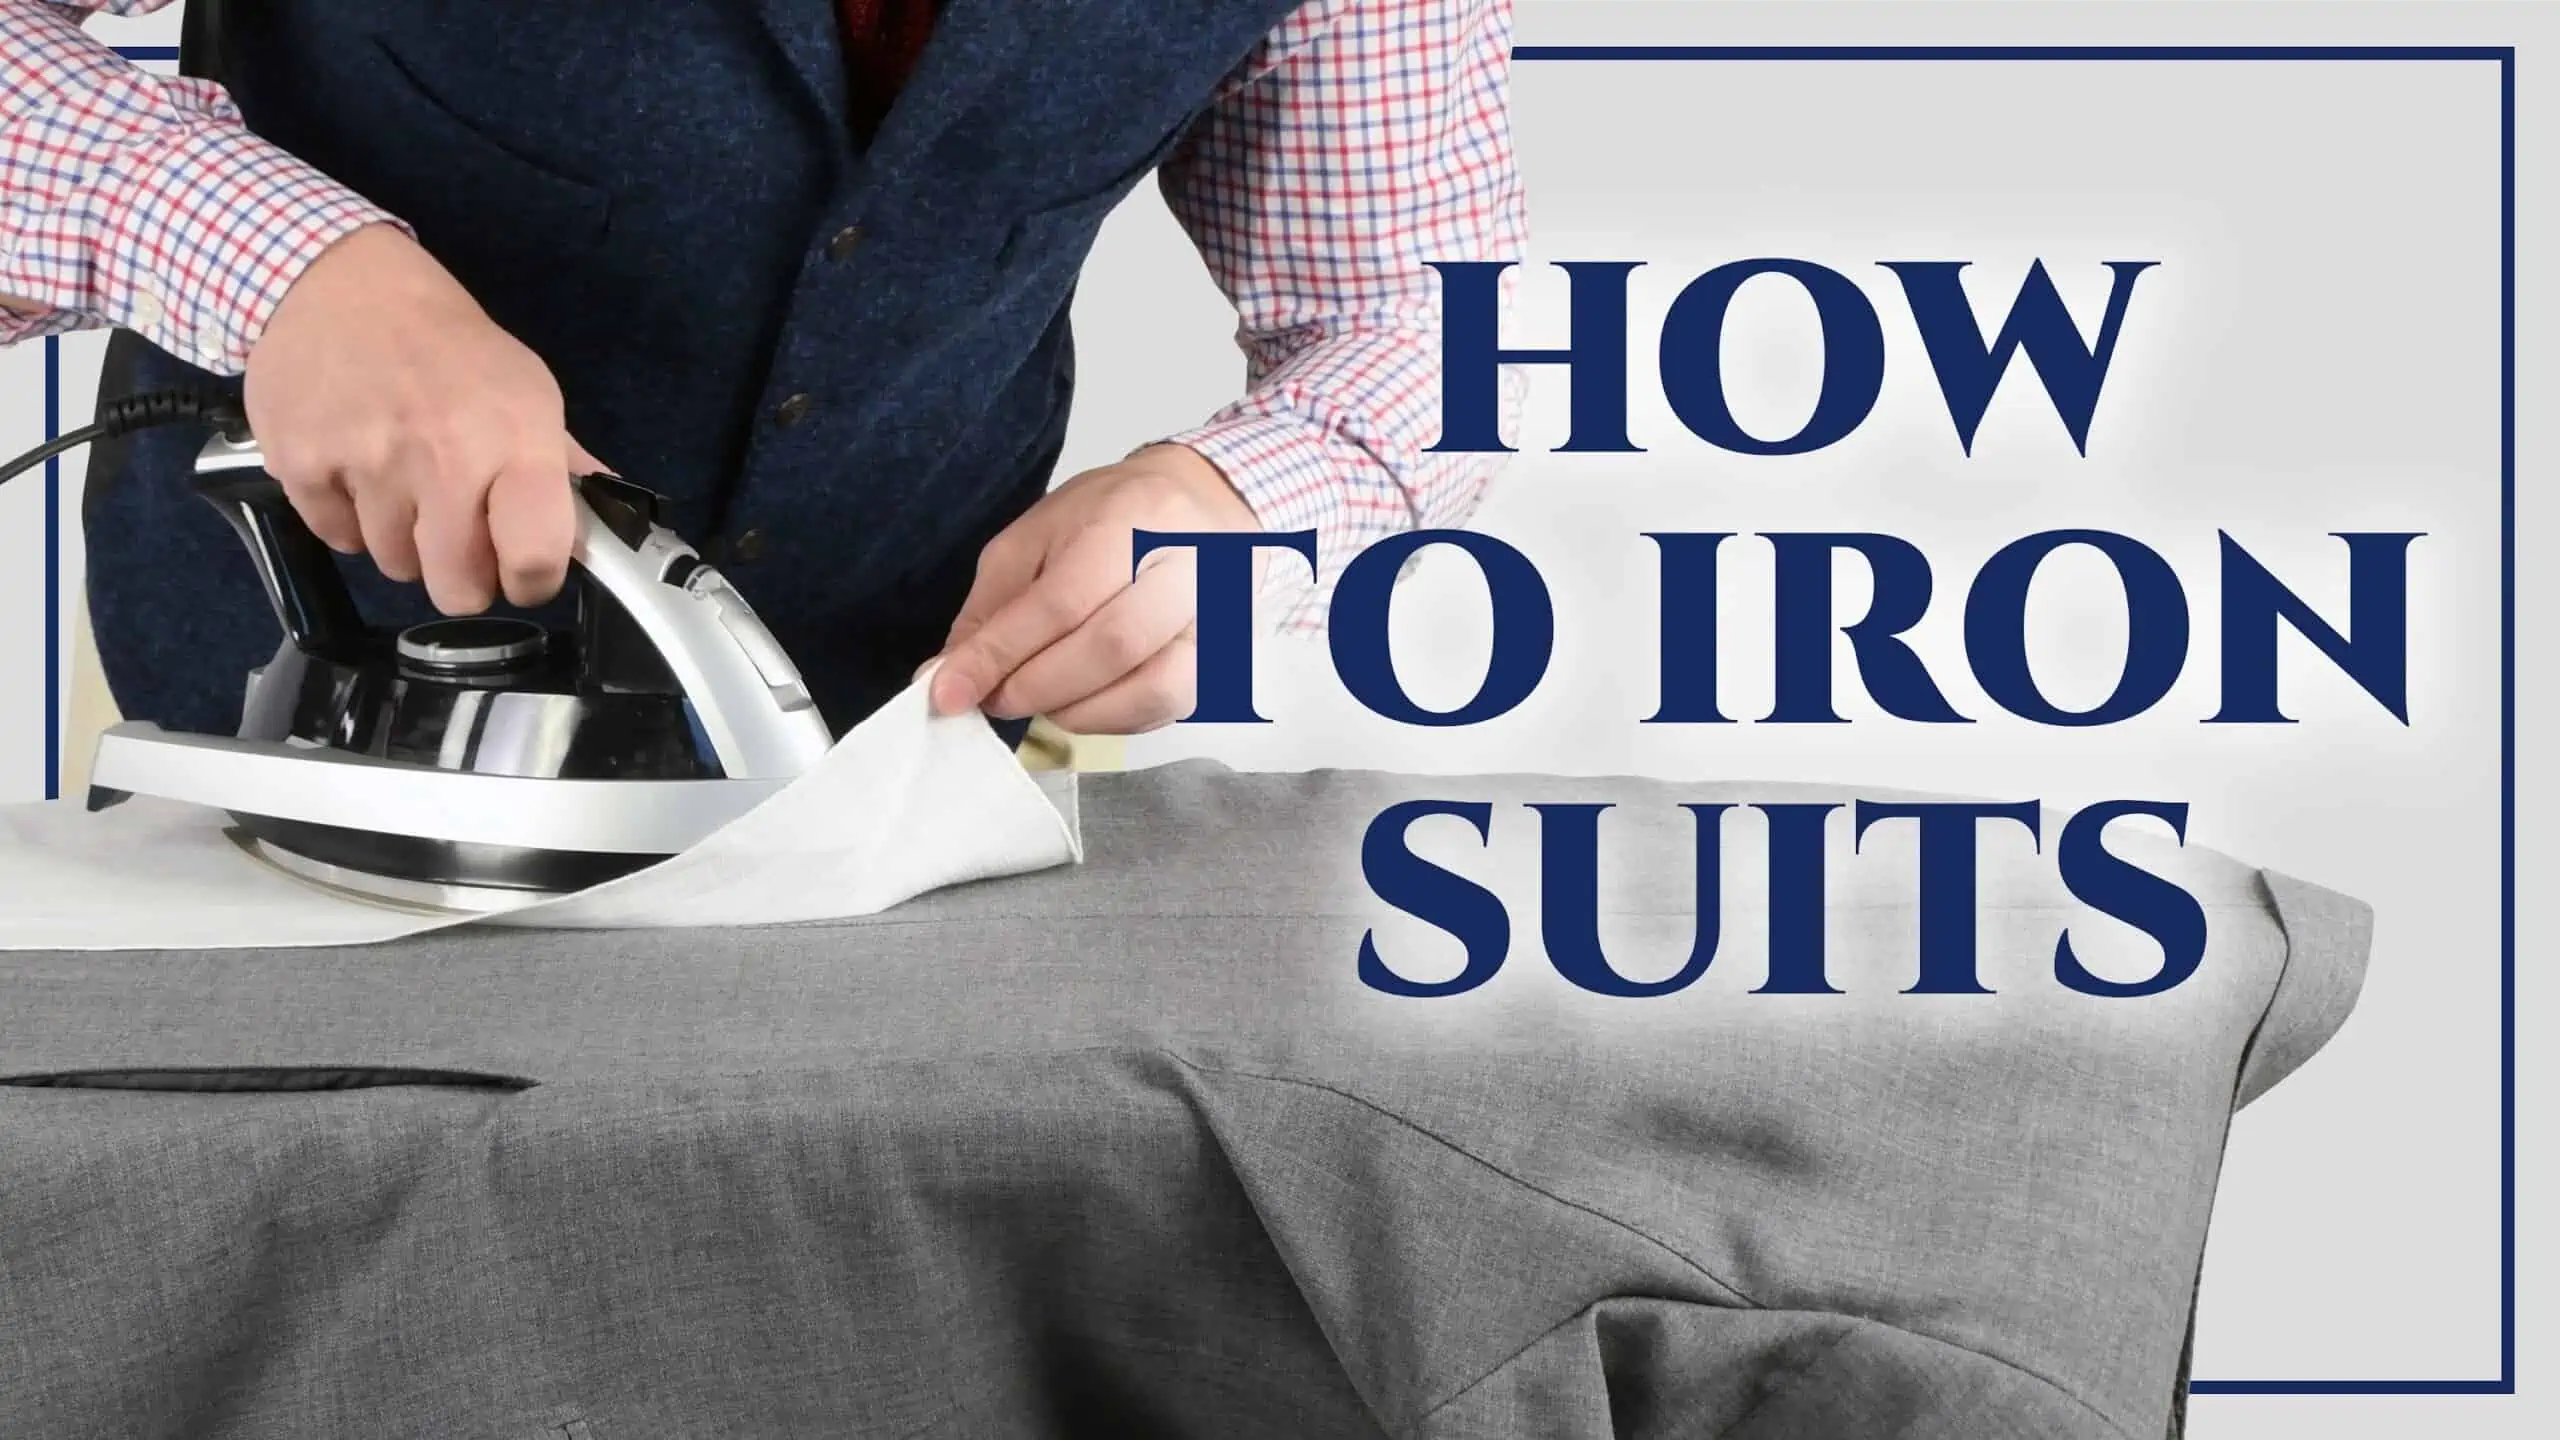 How To Iron A Suit Jacket Part IV - The Complete Guide To Ironing